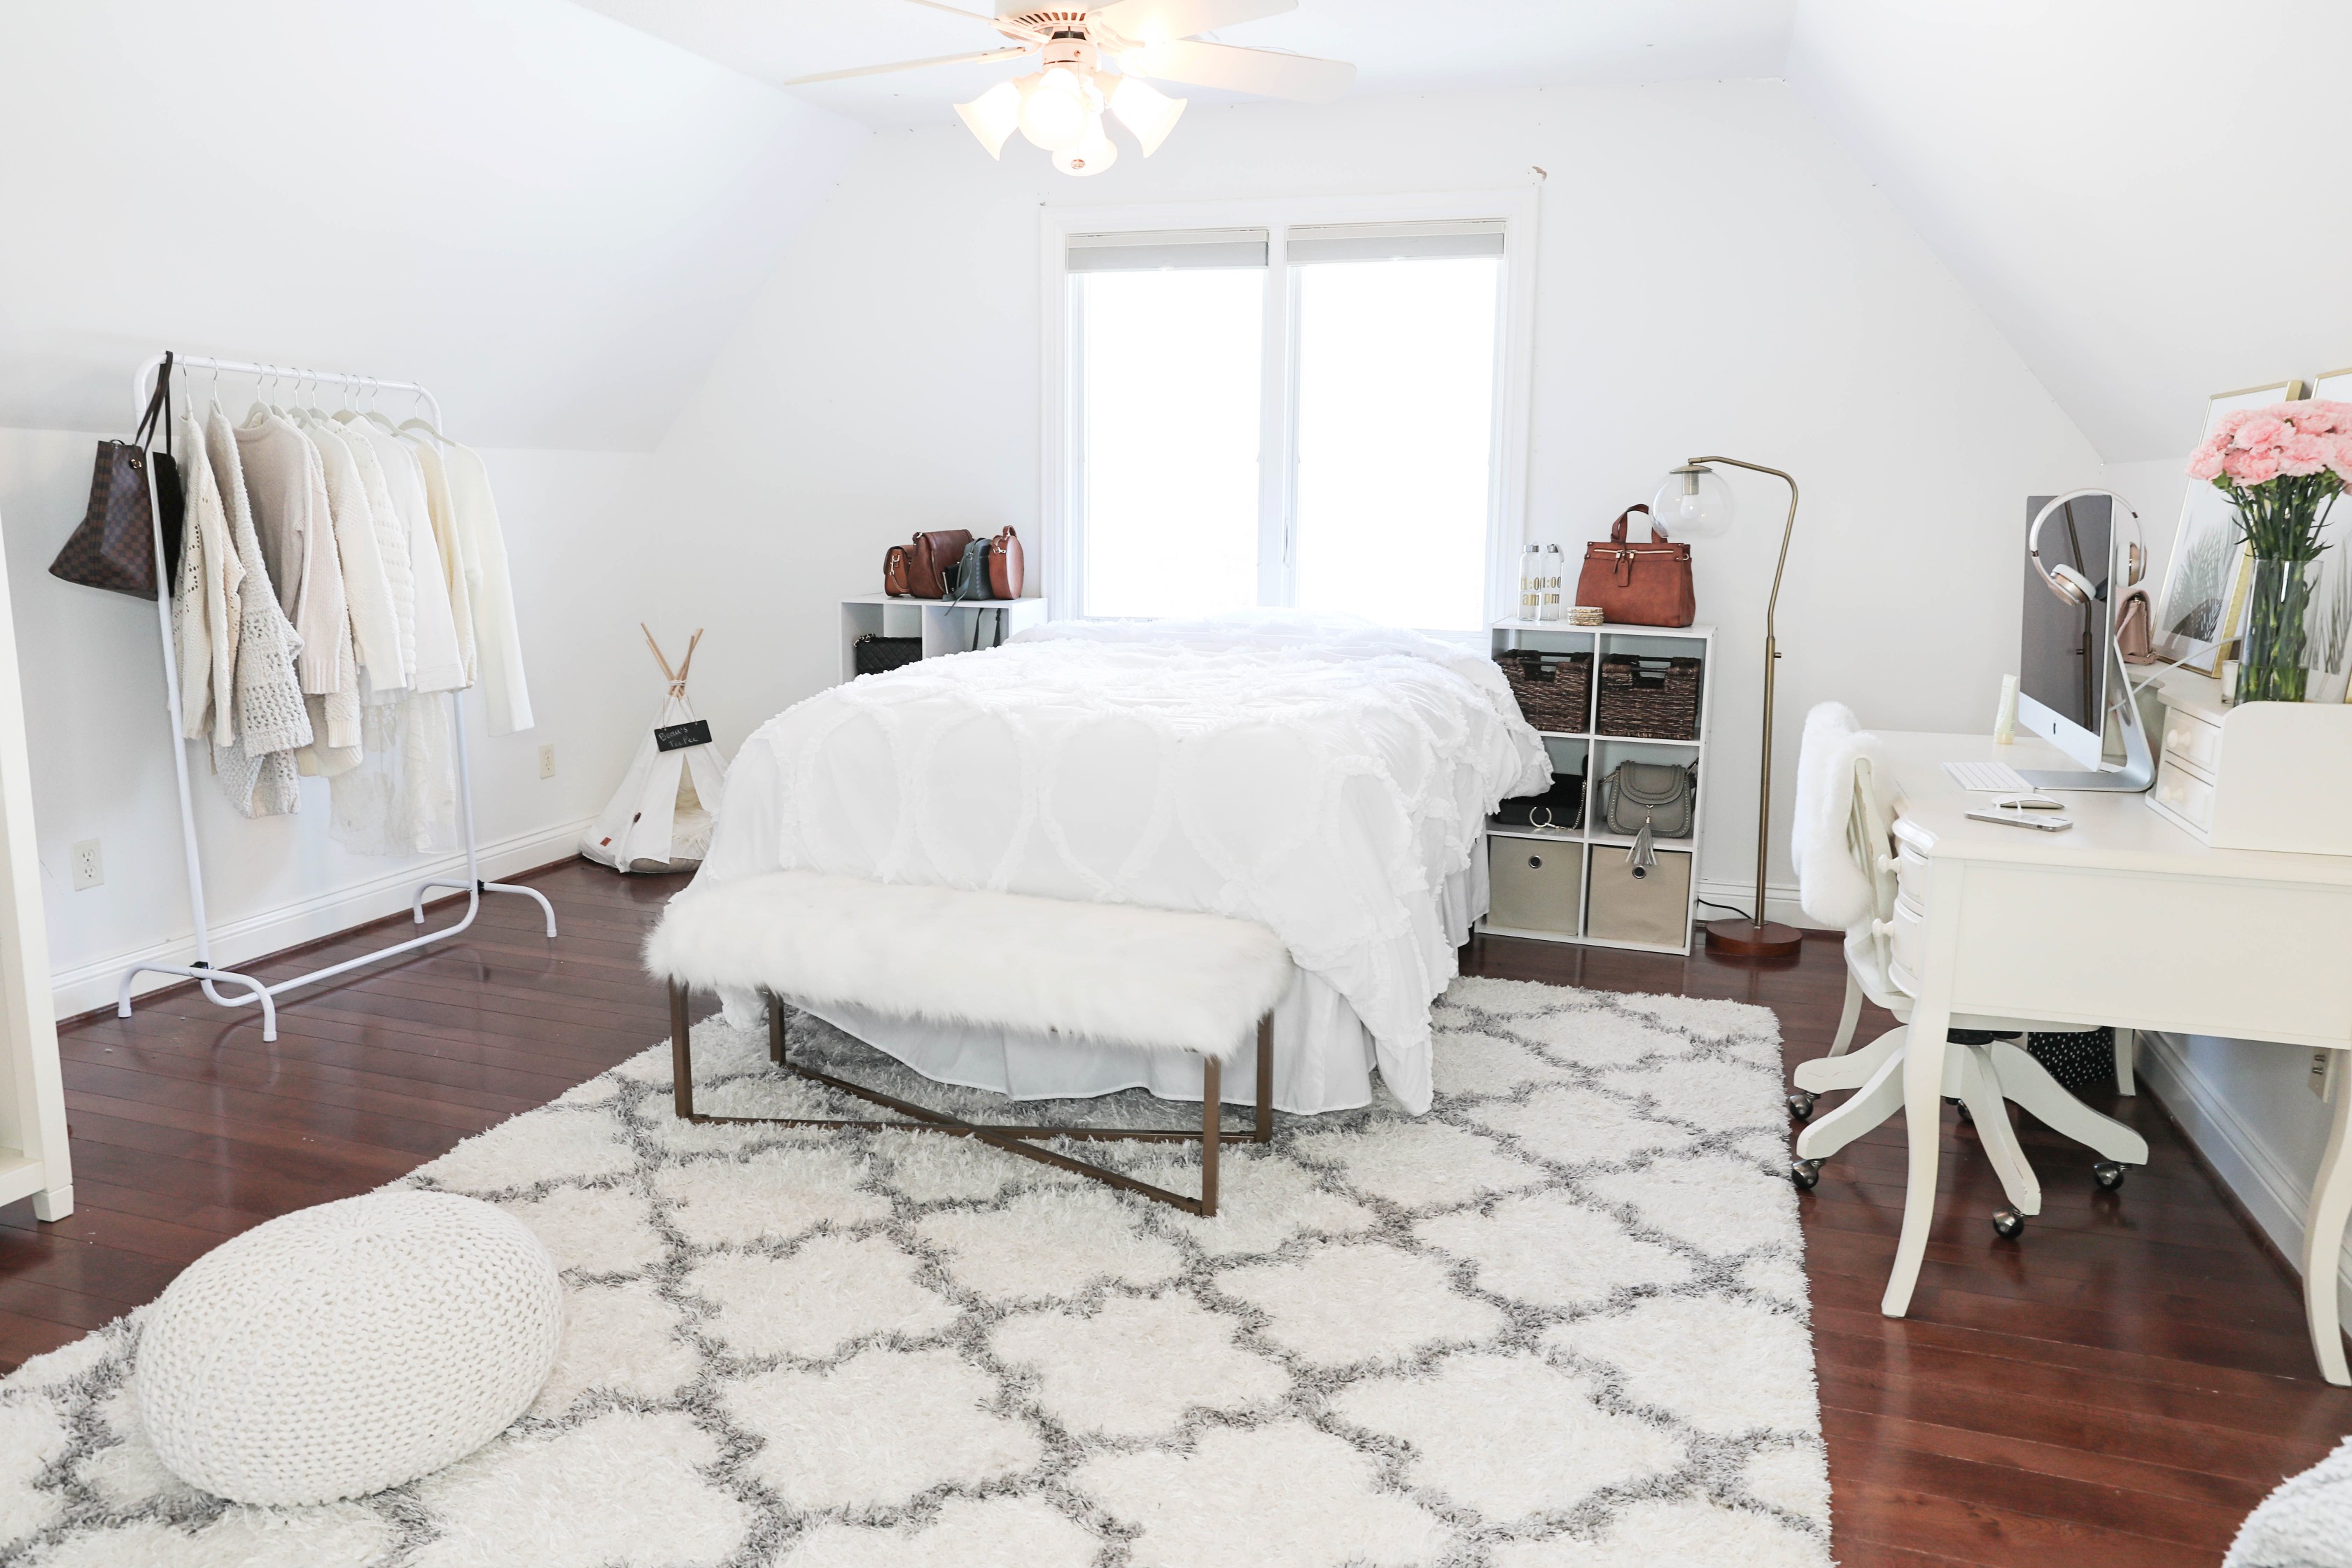 Room decluttering tips! Total closet clean out to live a minimal lifestyle. Spring cleaning means getting rid of clutter! Insane before and after photos of decluttering on lifestyle blog daily dose of charm by lauren lindmark